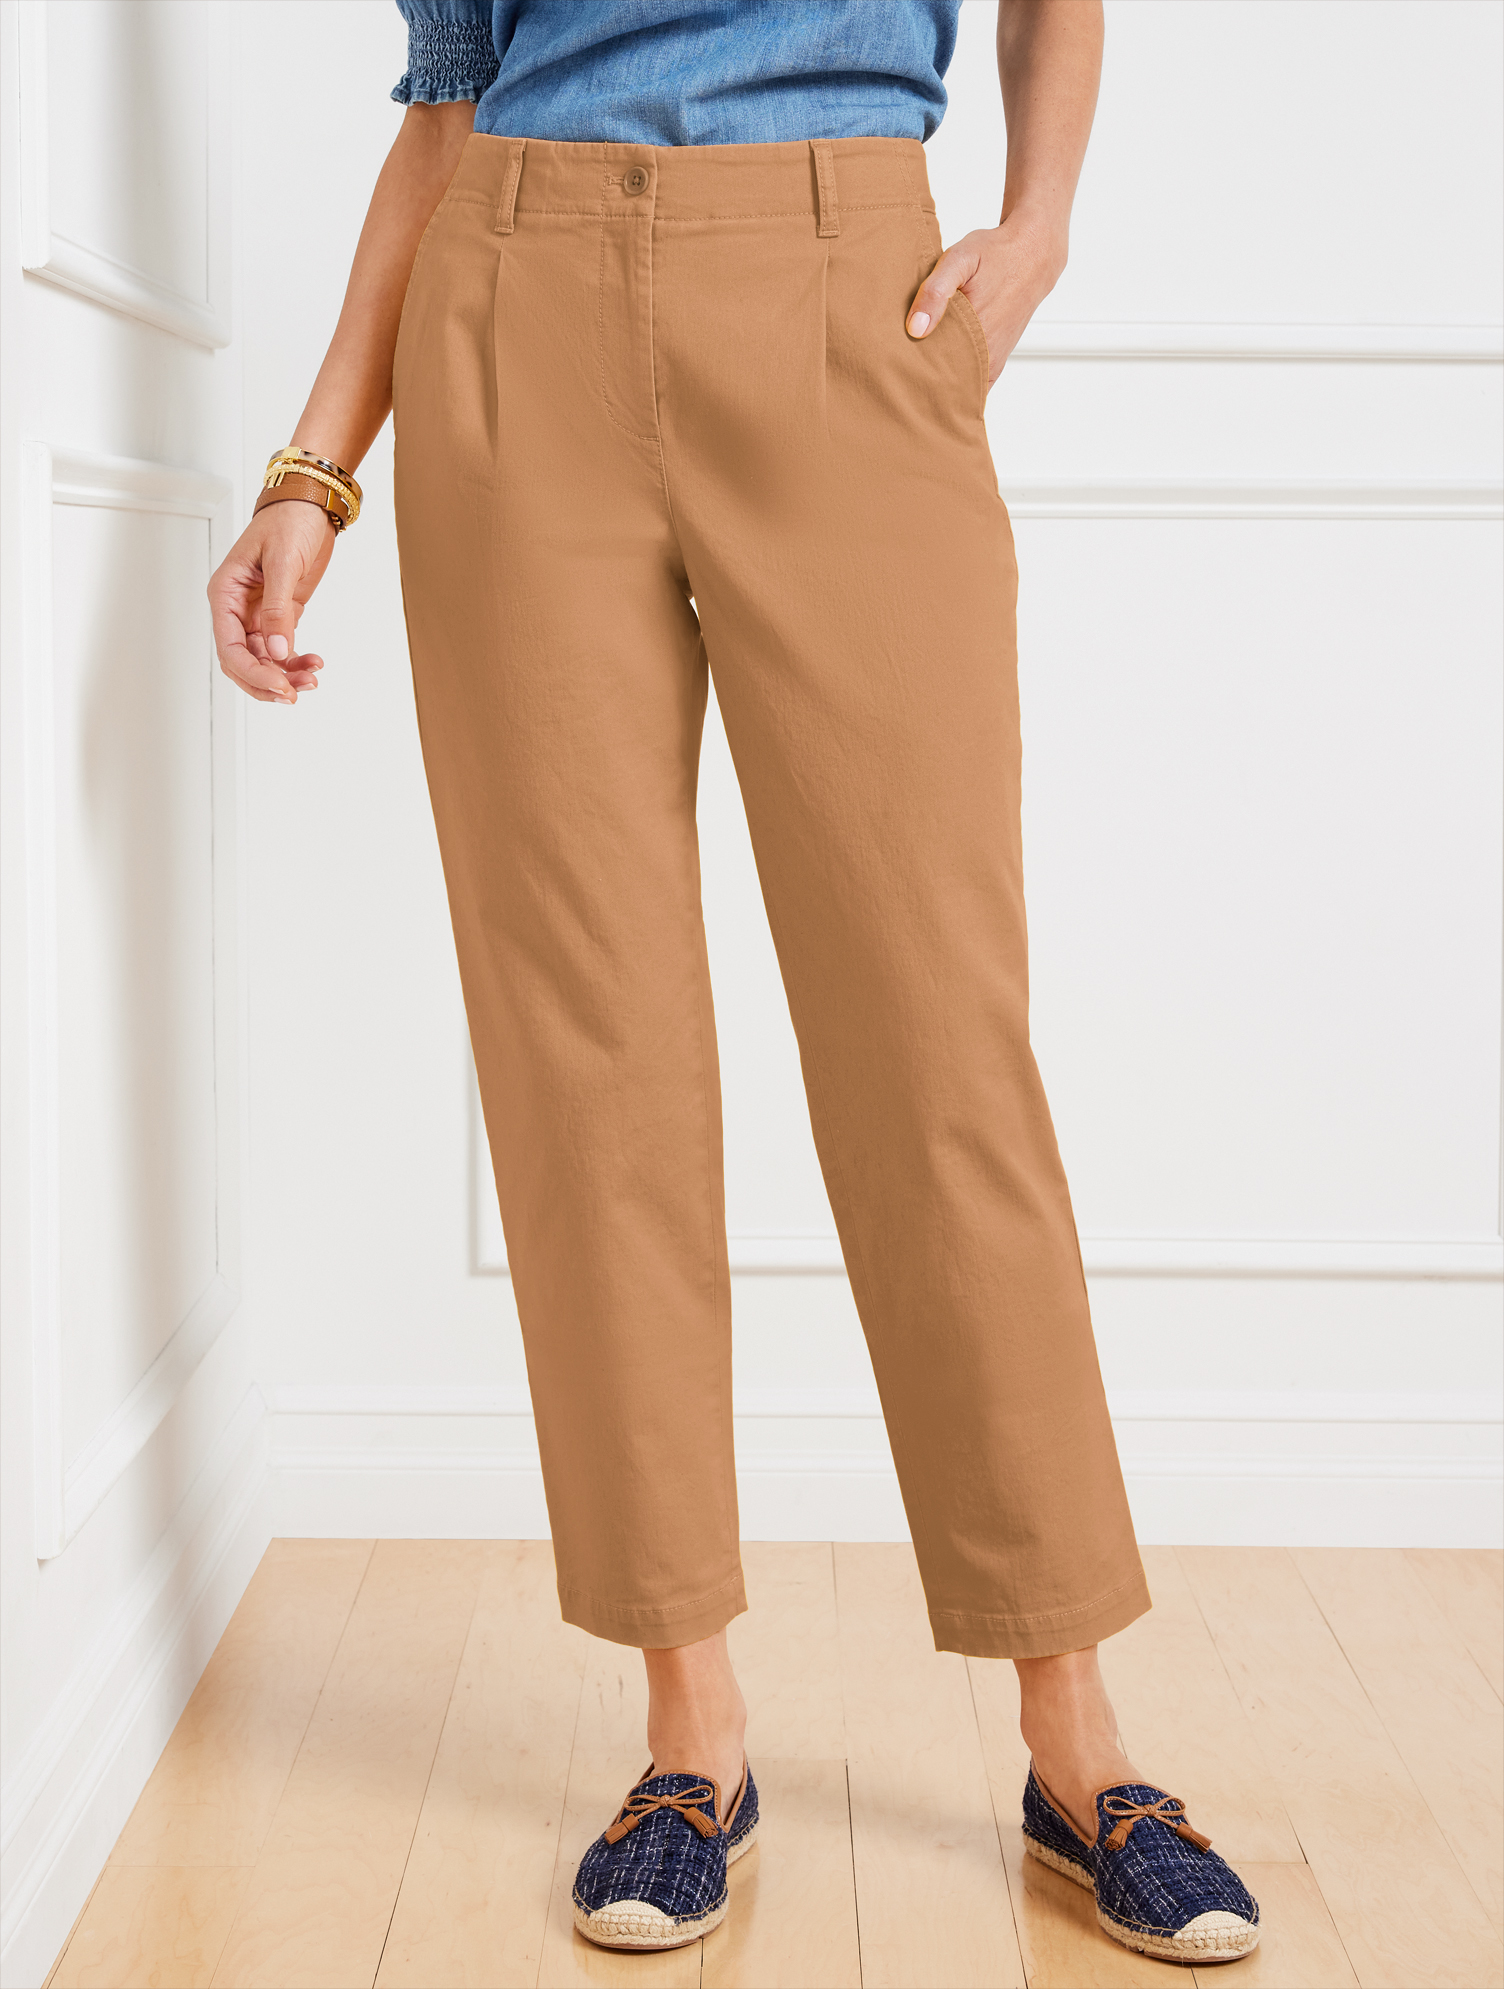 Talbots Modern Twill Pleated Chinos Pants - Cafe - 8